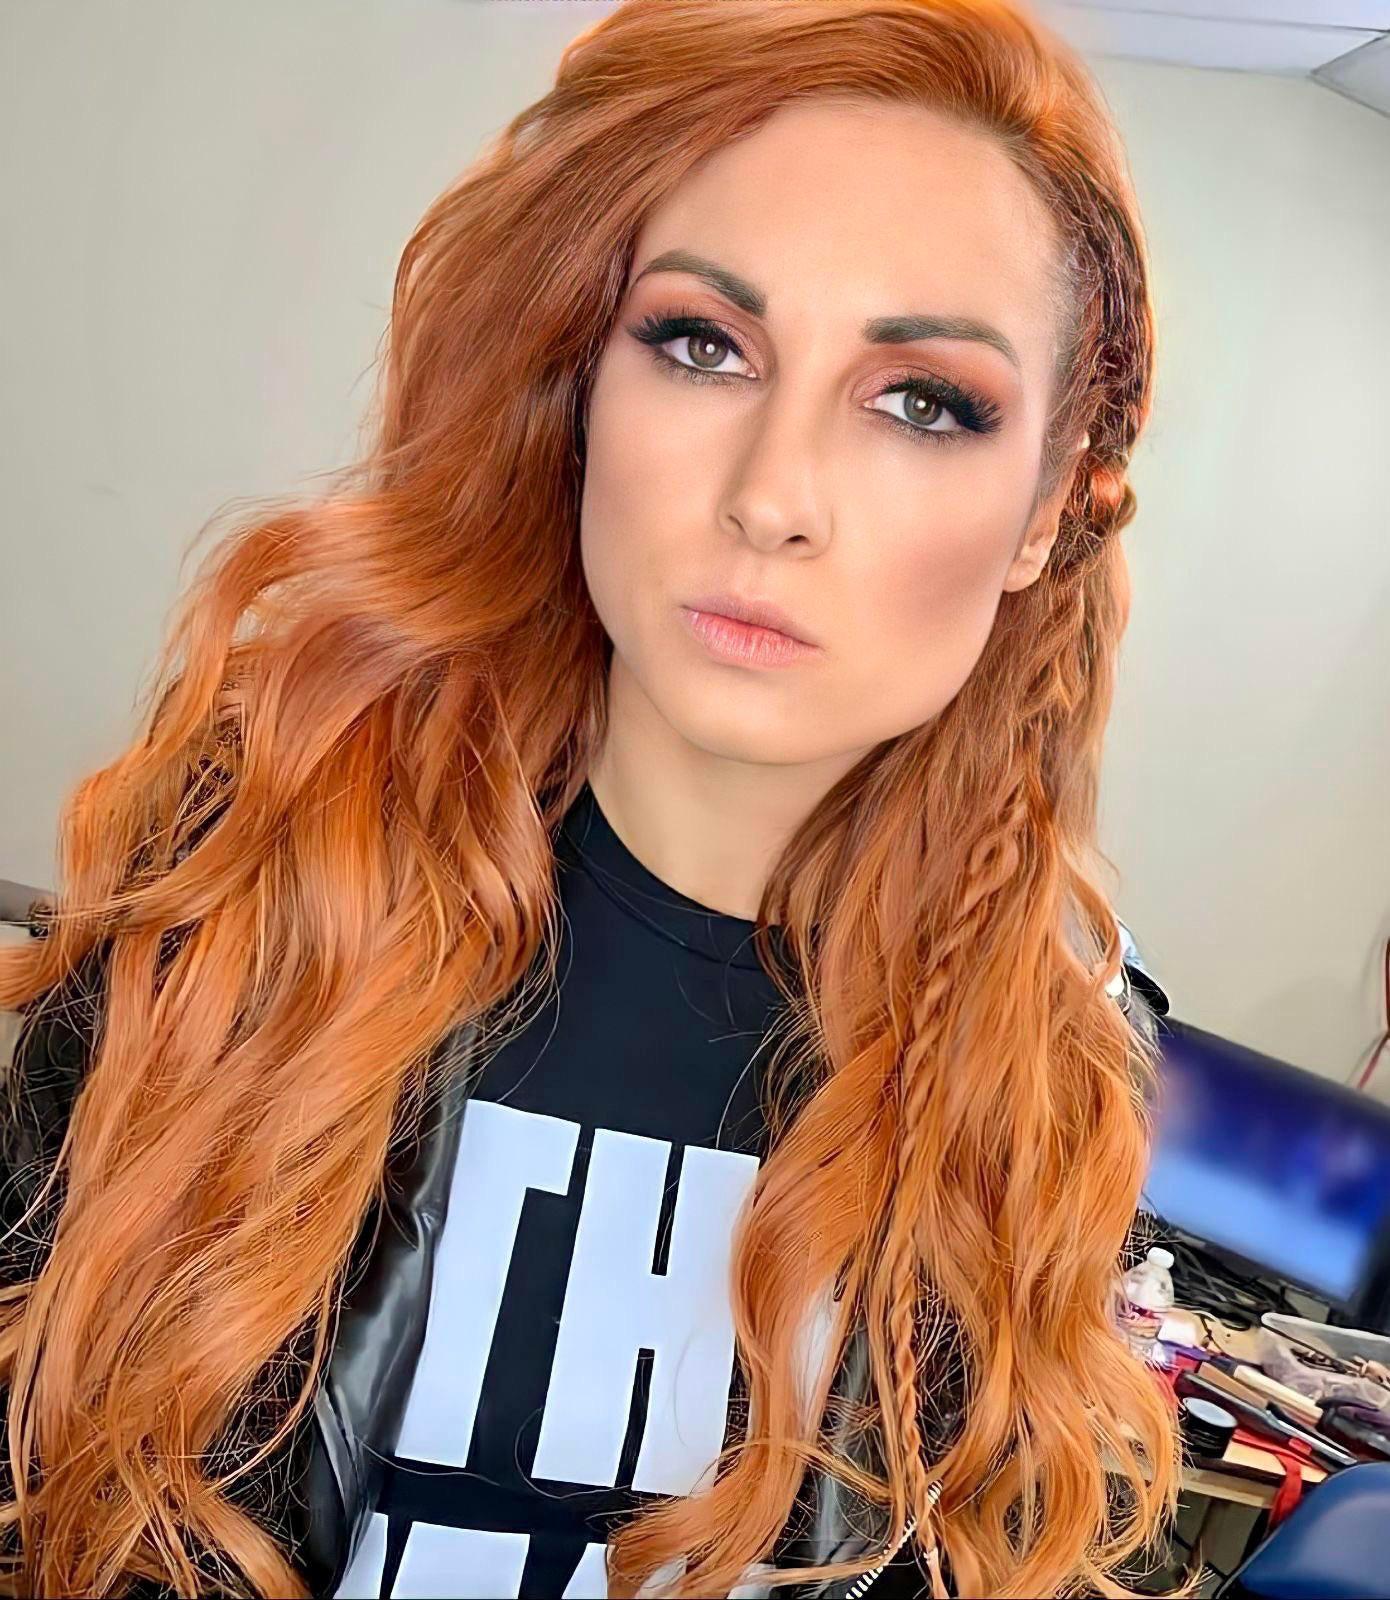 Id love to have Becky Lynch or any other WWE